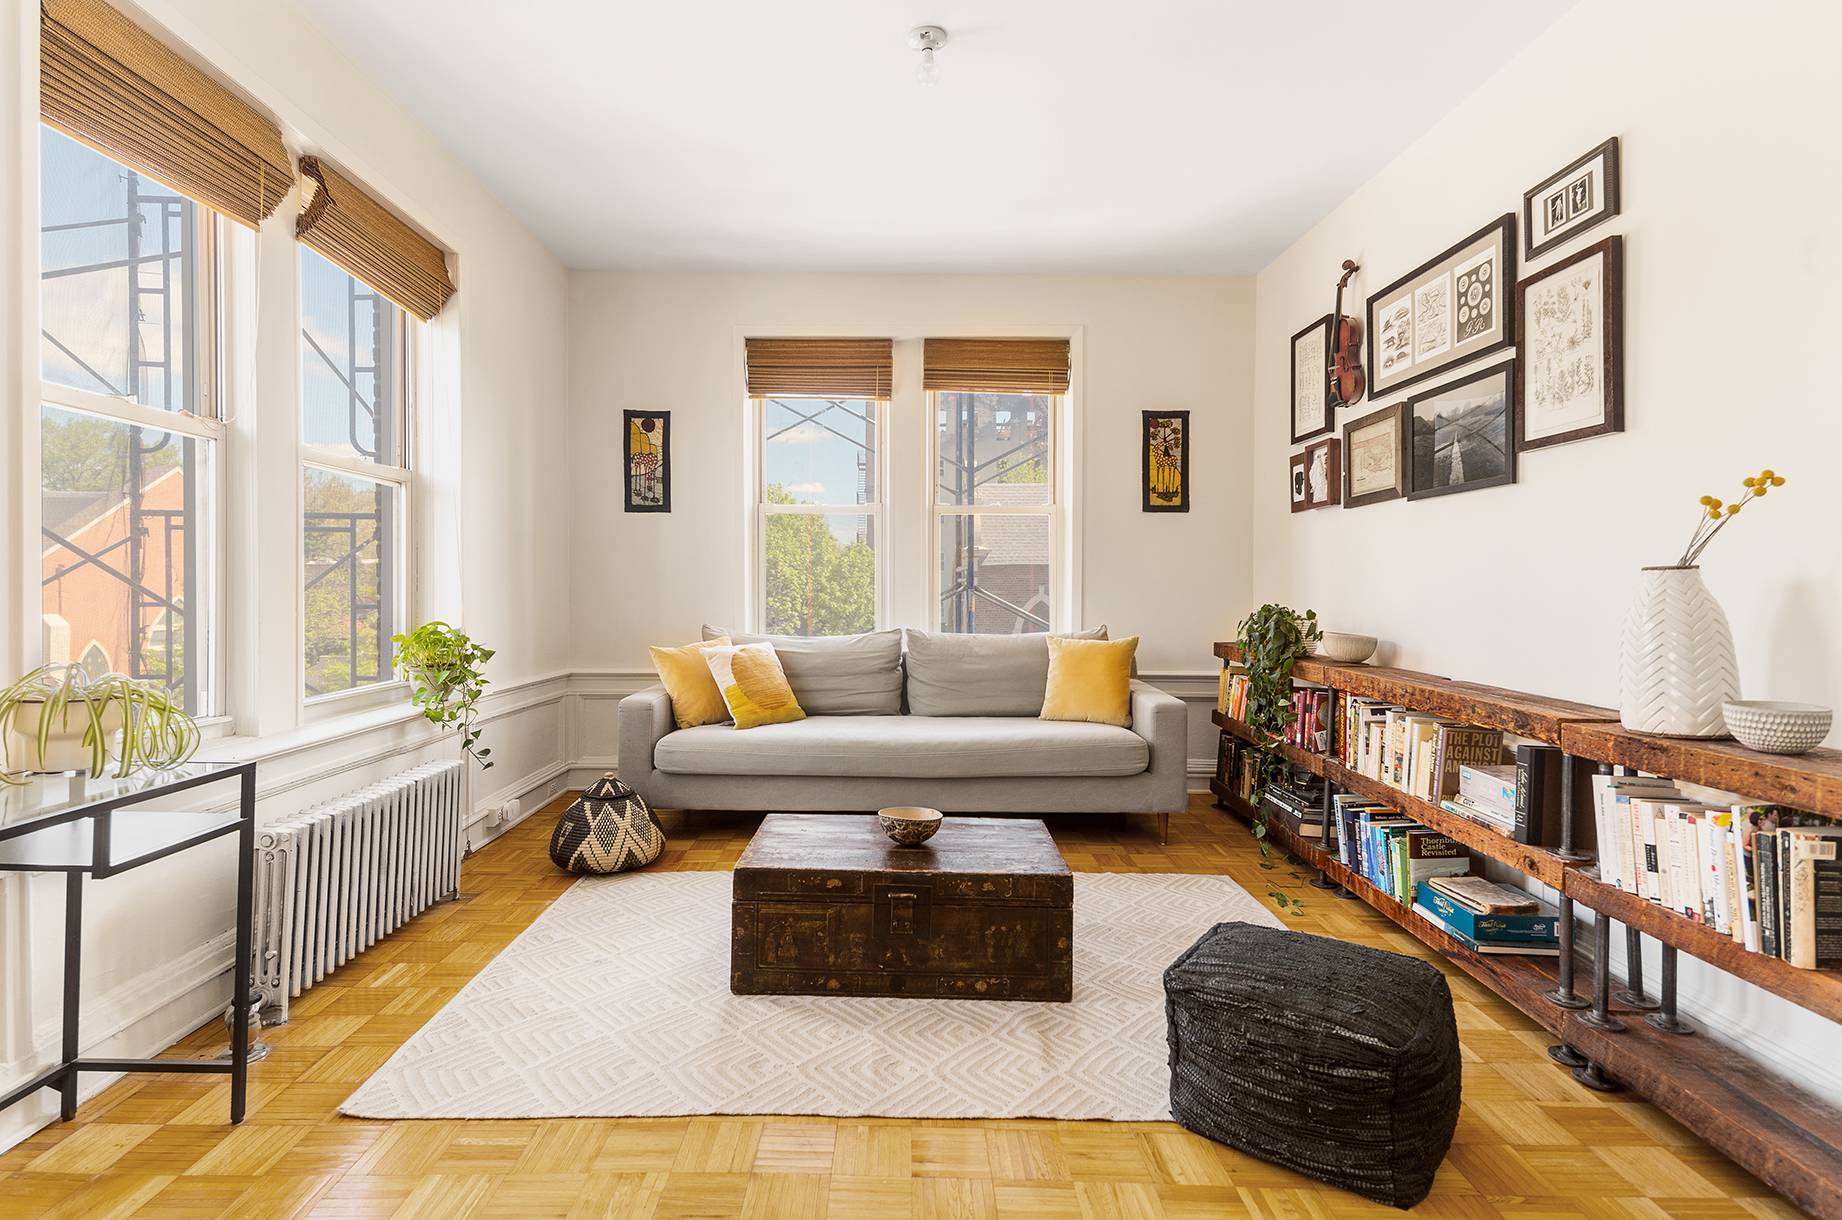 Linden Heights Coop has a Northwest corner unit available in the Sunset Park neighborhood of Brooklyn.